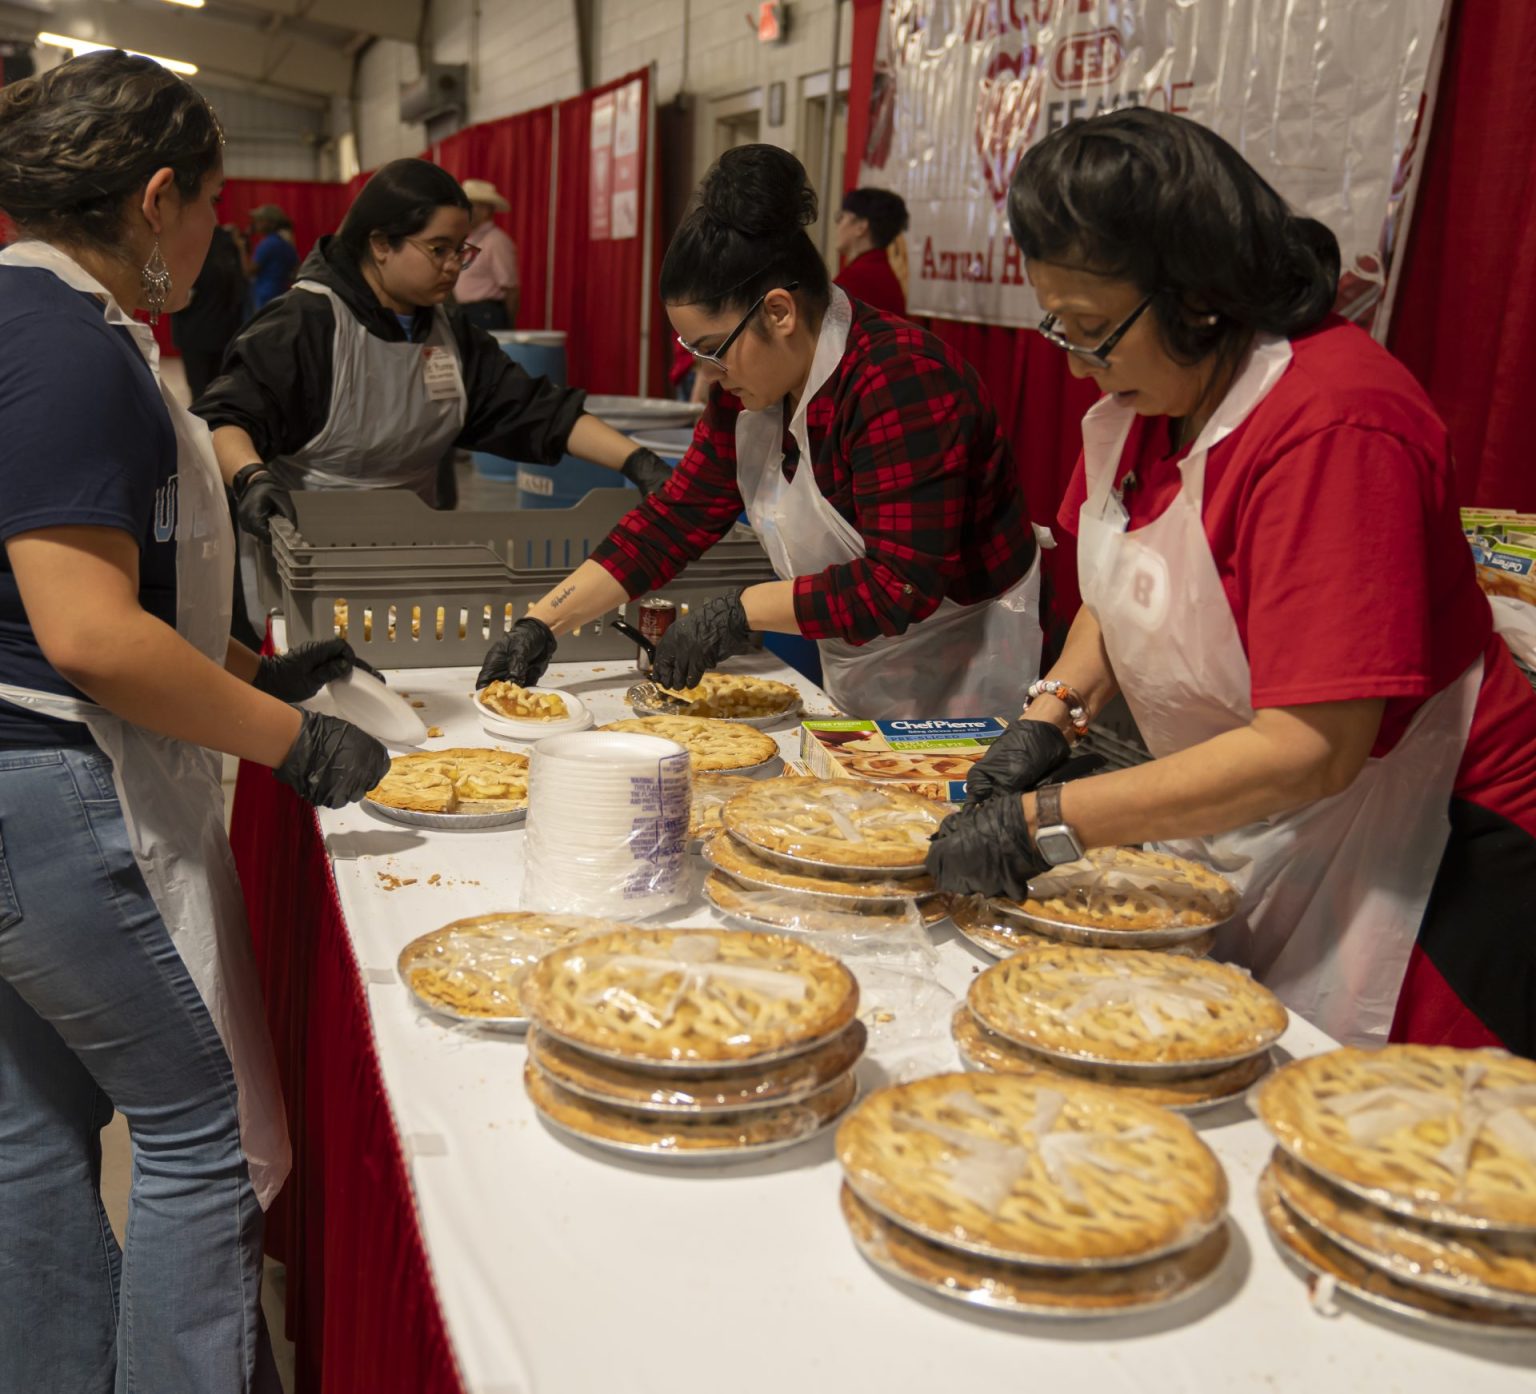 PHOTO GALLERY HEB fills plates and spreads holiday cheer at annual